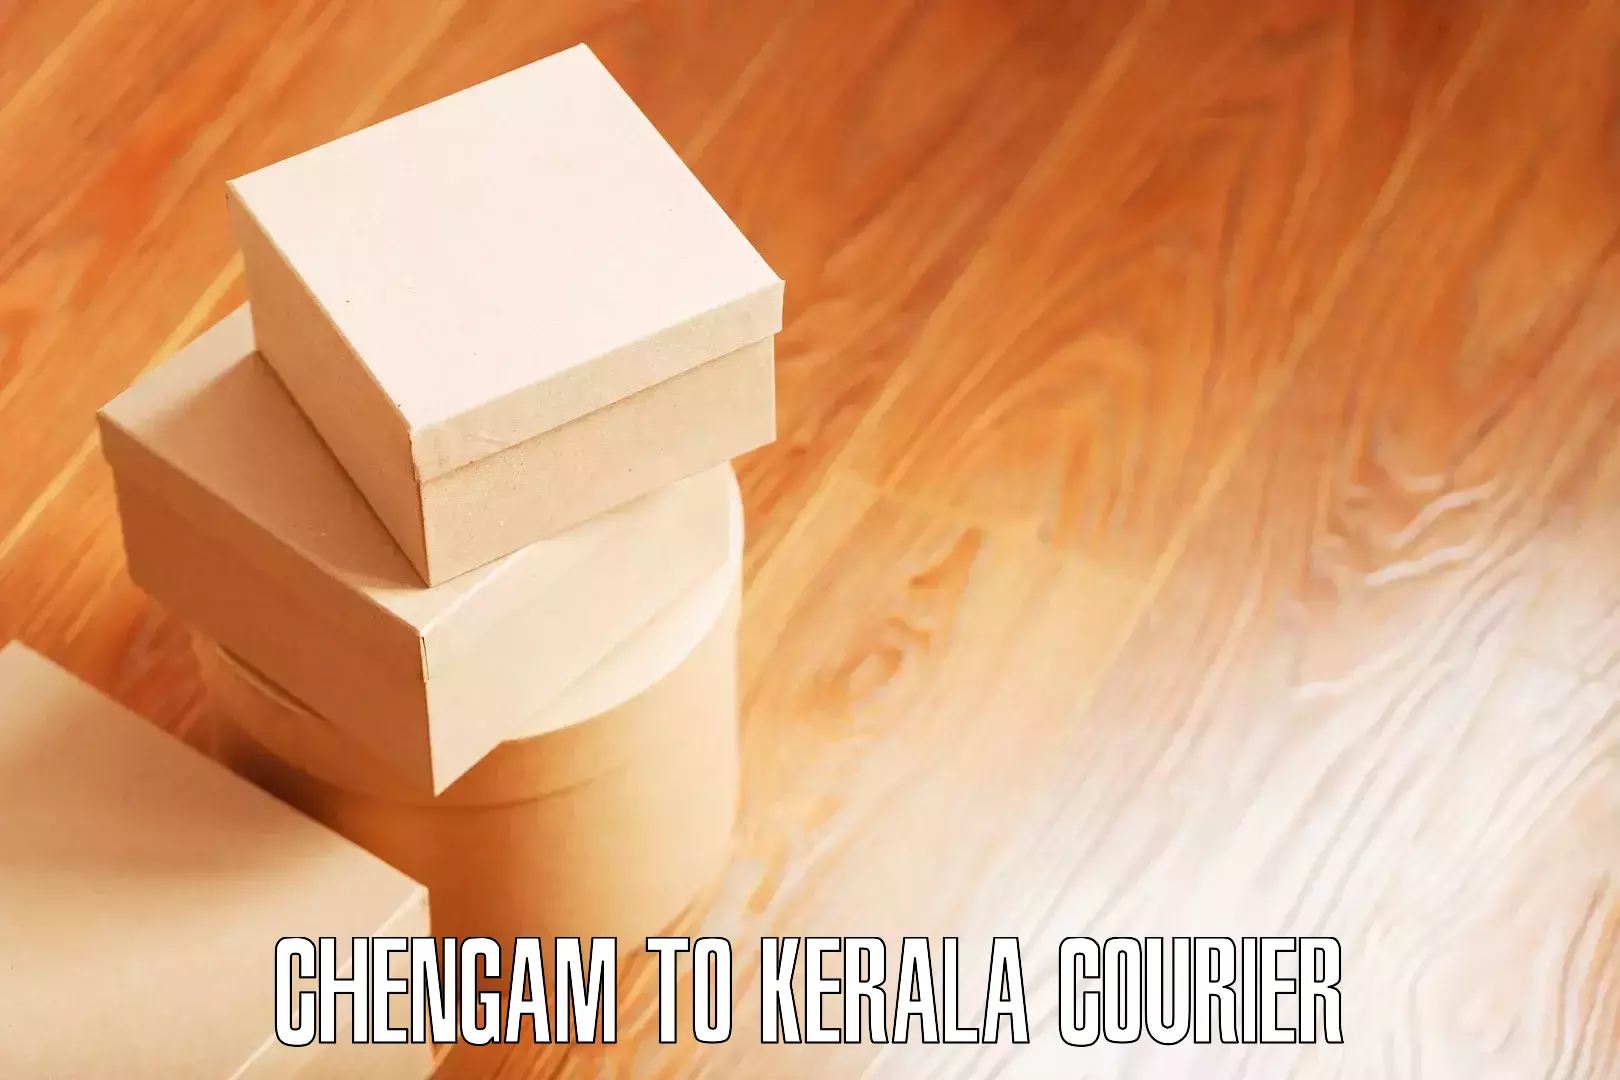 Efficient relocation services Chengam to Kerala